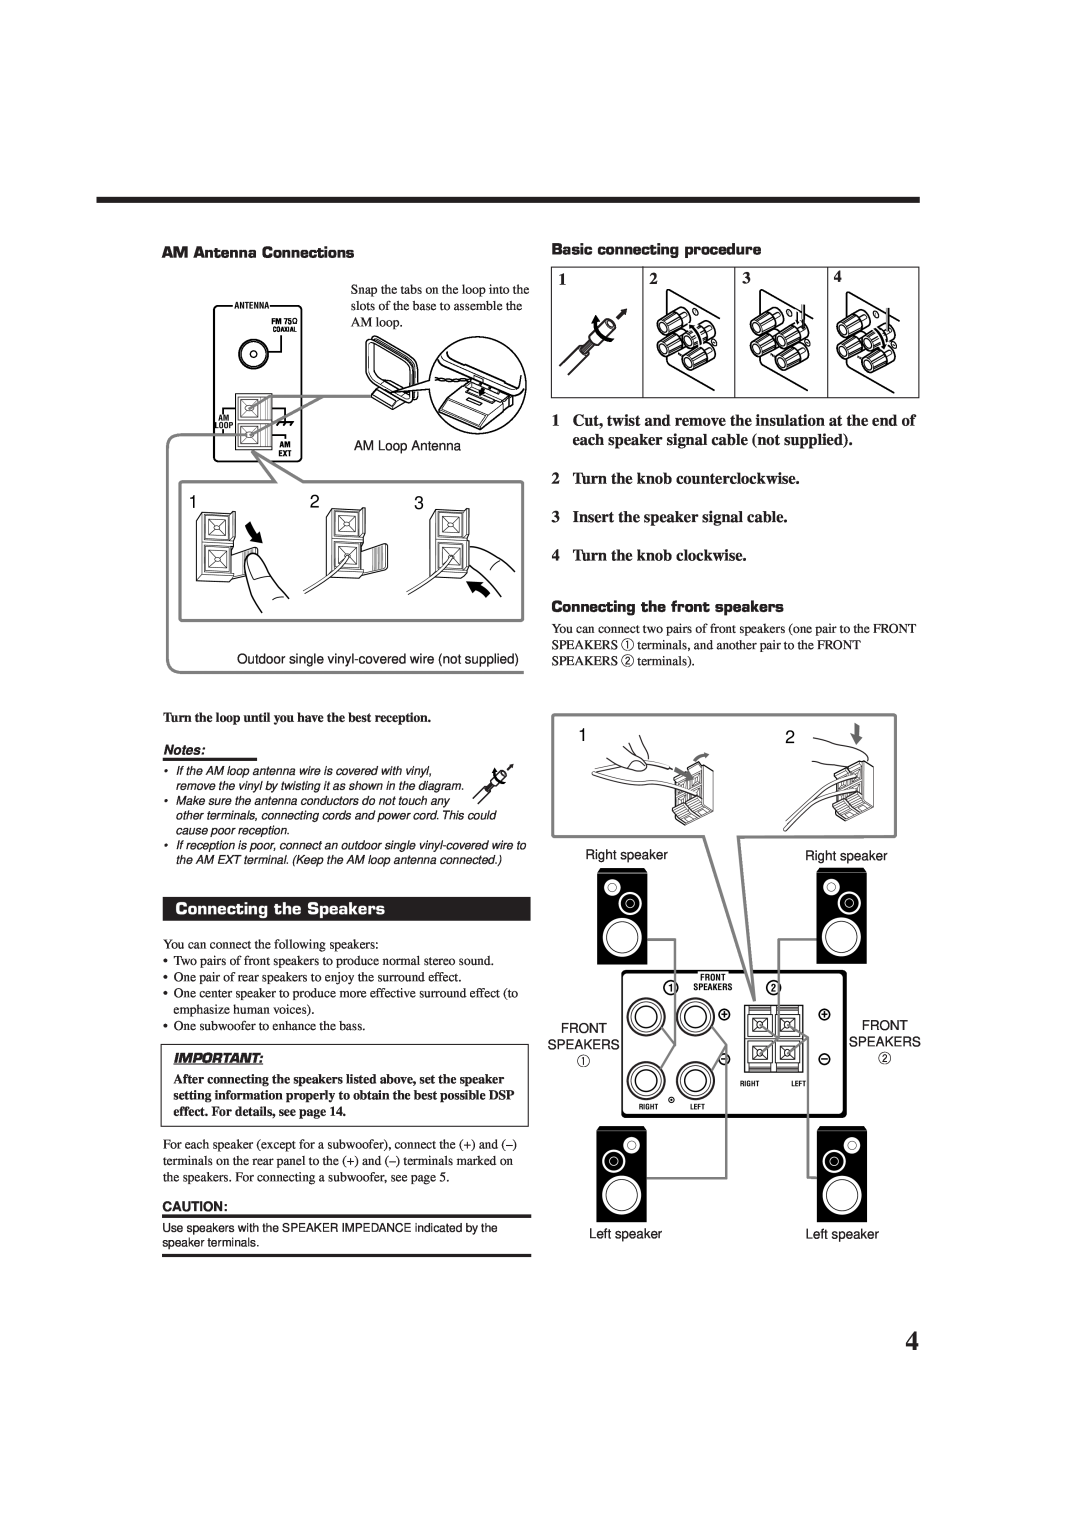 JVC RX-7010VBK manual 2Turn the knob counterclockwise, 3Insert the speaker signal cable, 4Turn the knob clockwise 